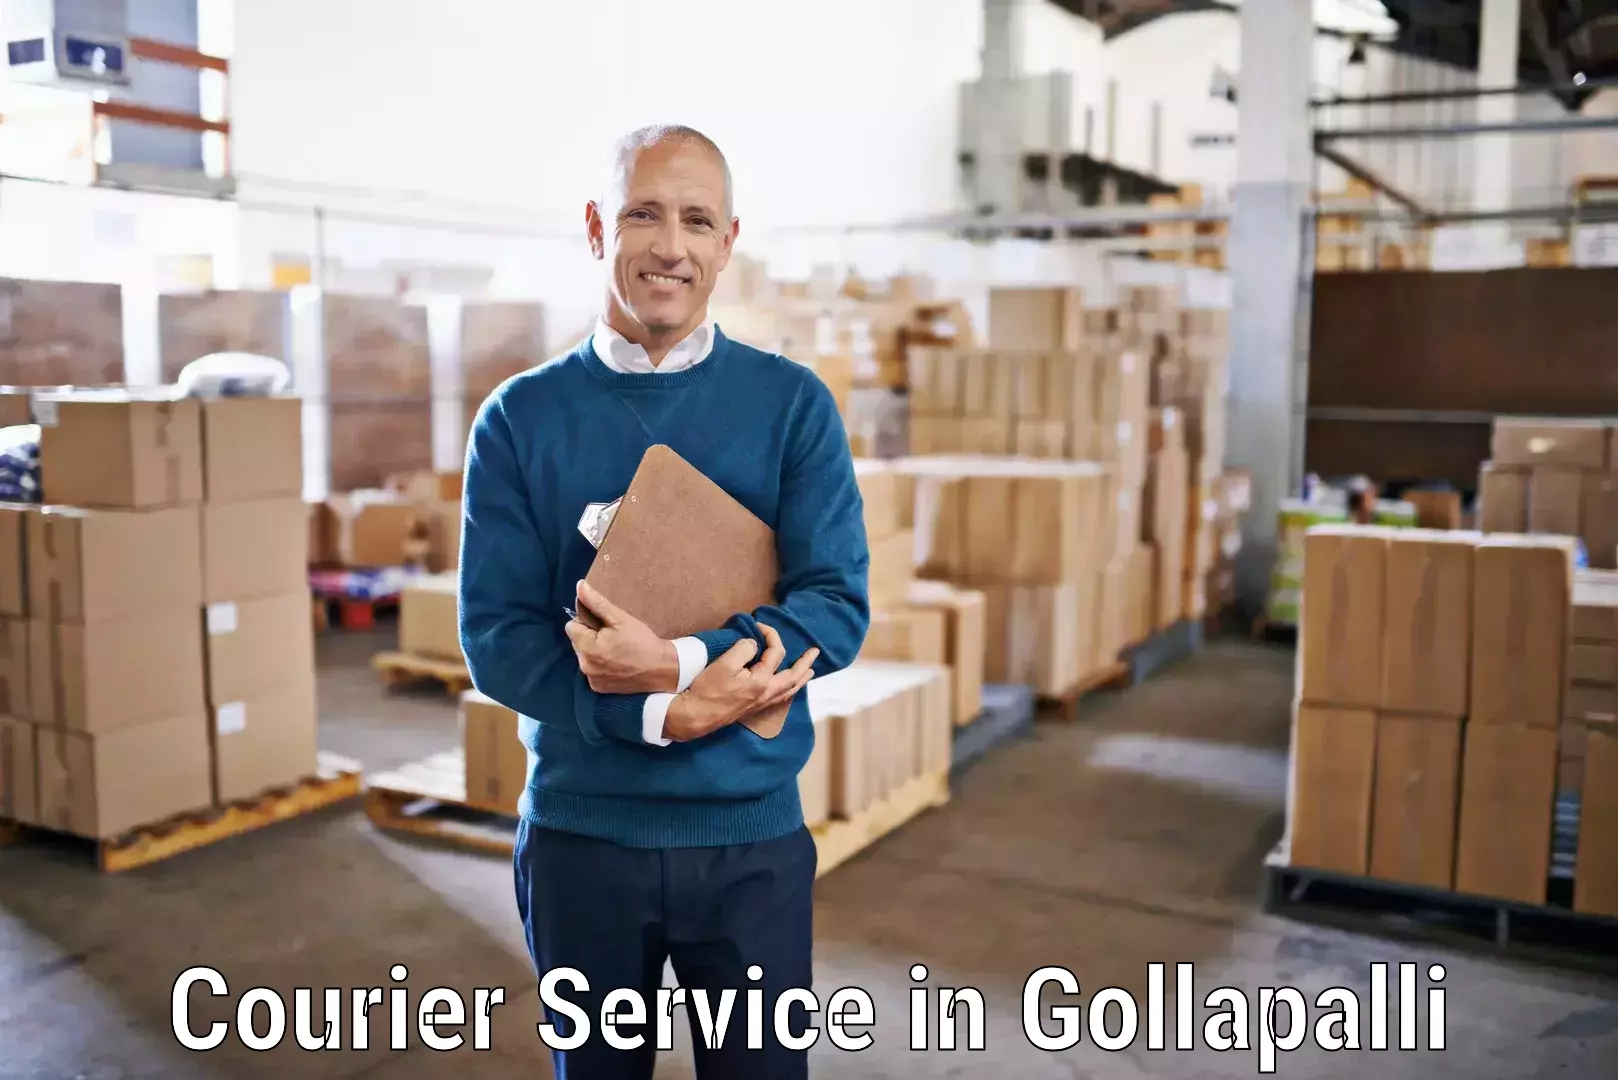 Seamless shipping experience in Gollapalli